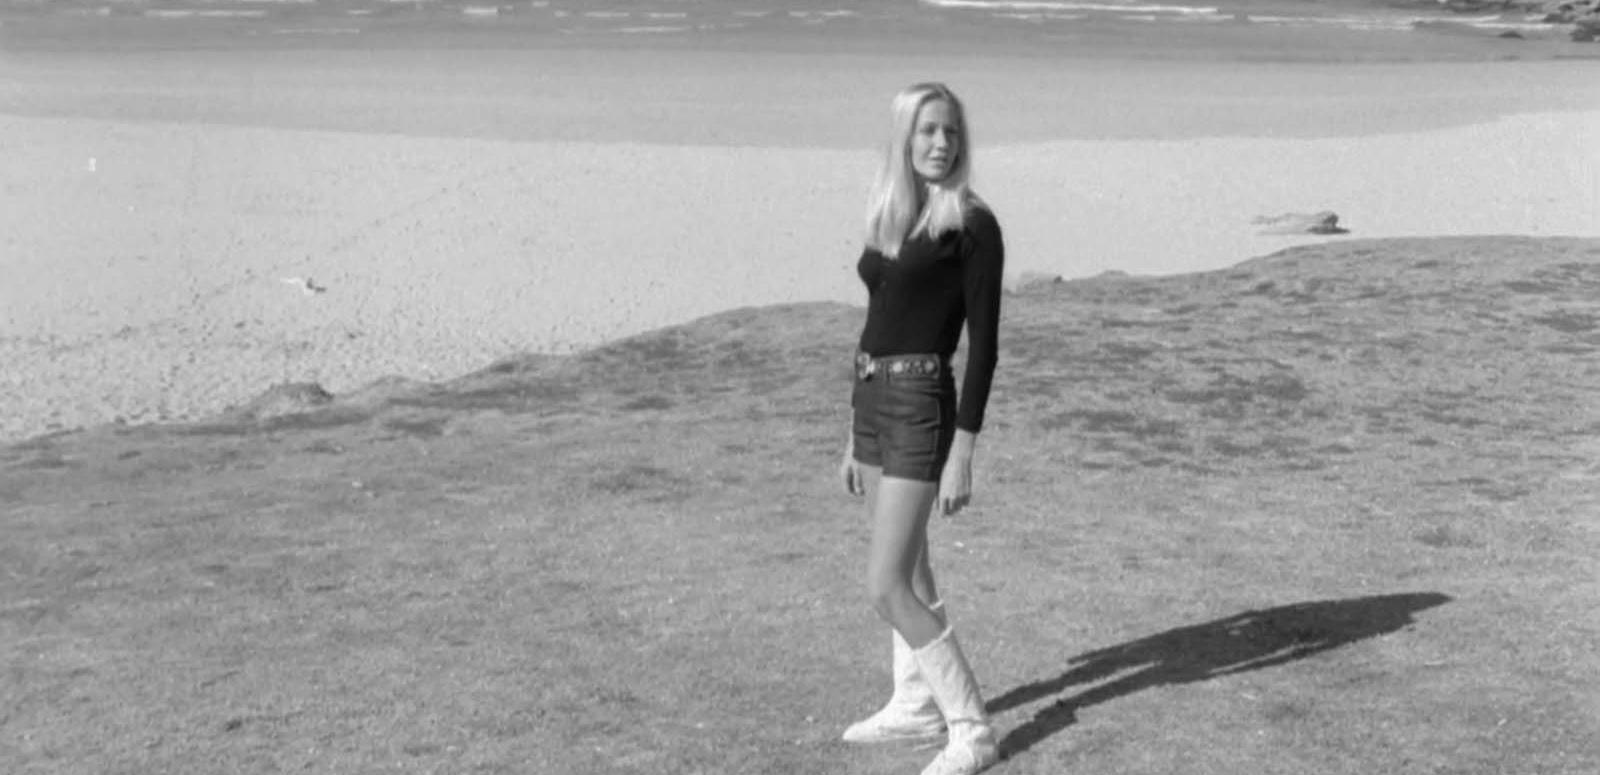 A young woman models a pair of knee-length ugg boots at the beach in 1971